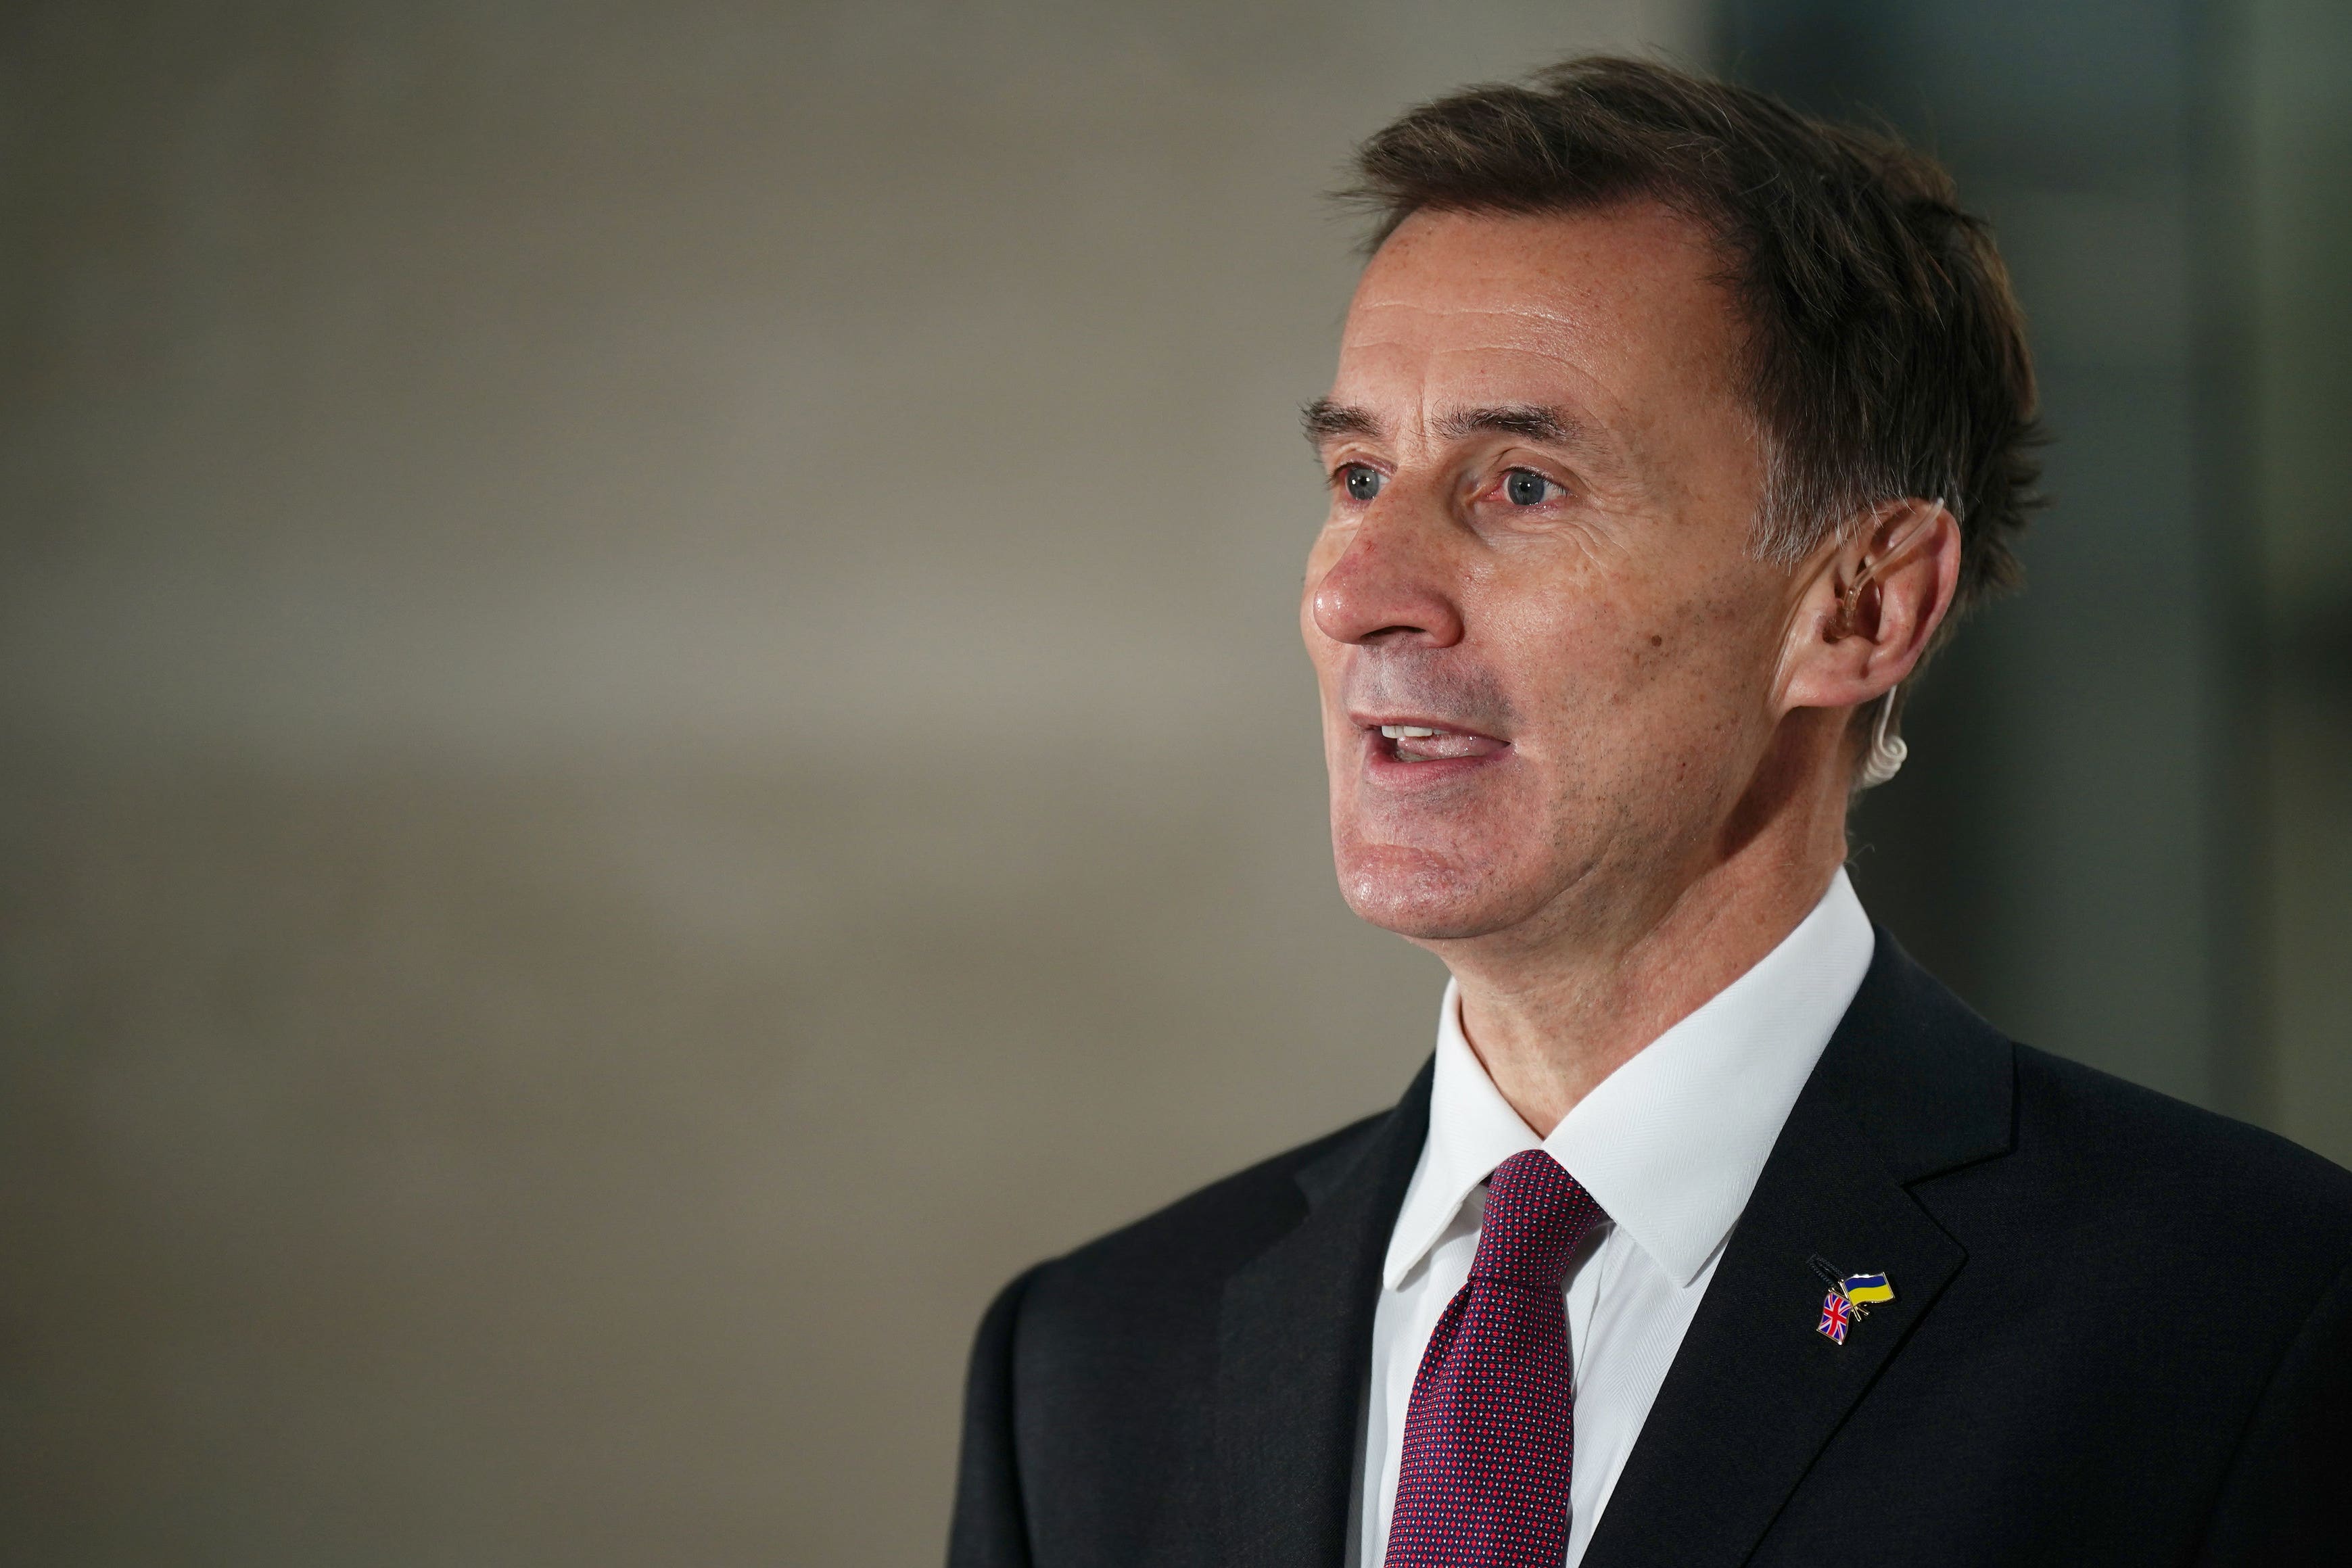 Jeremy Hunt said his reforms will unlock £75bn of investment from pension schemes to be funnelled into British firms